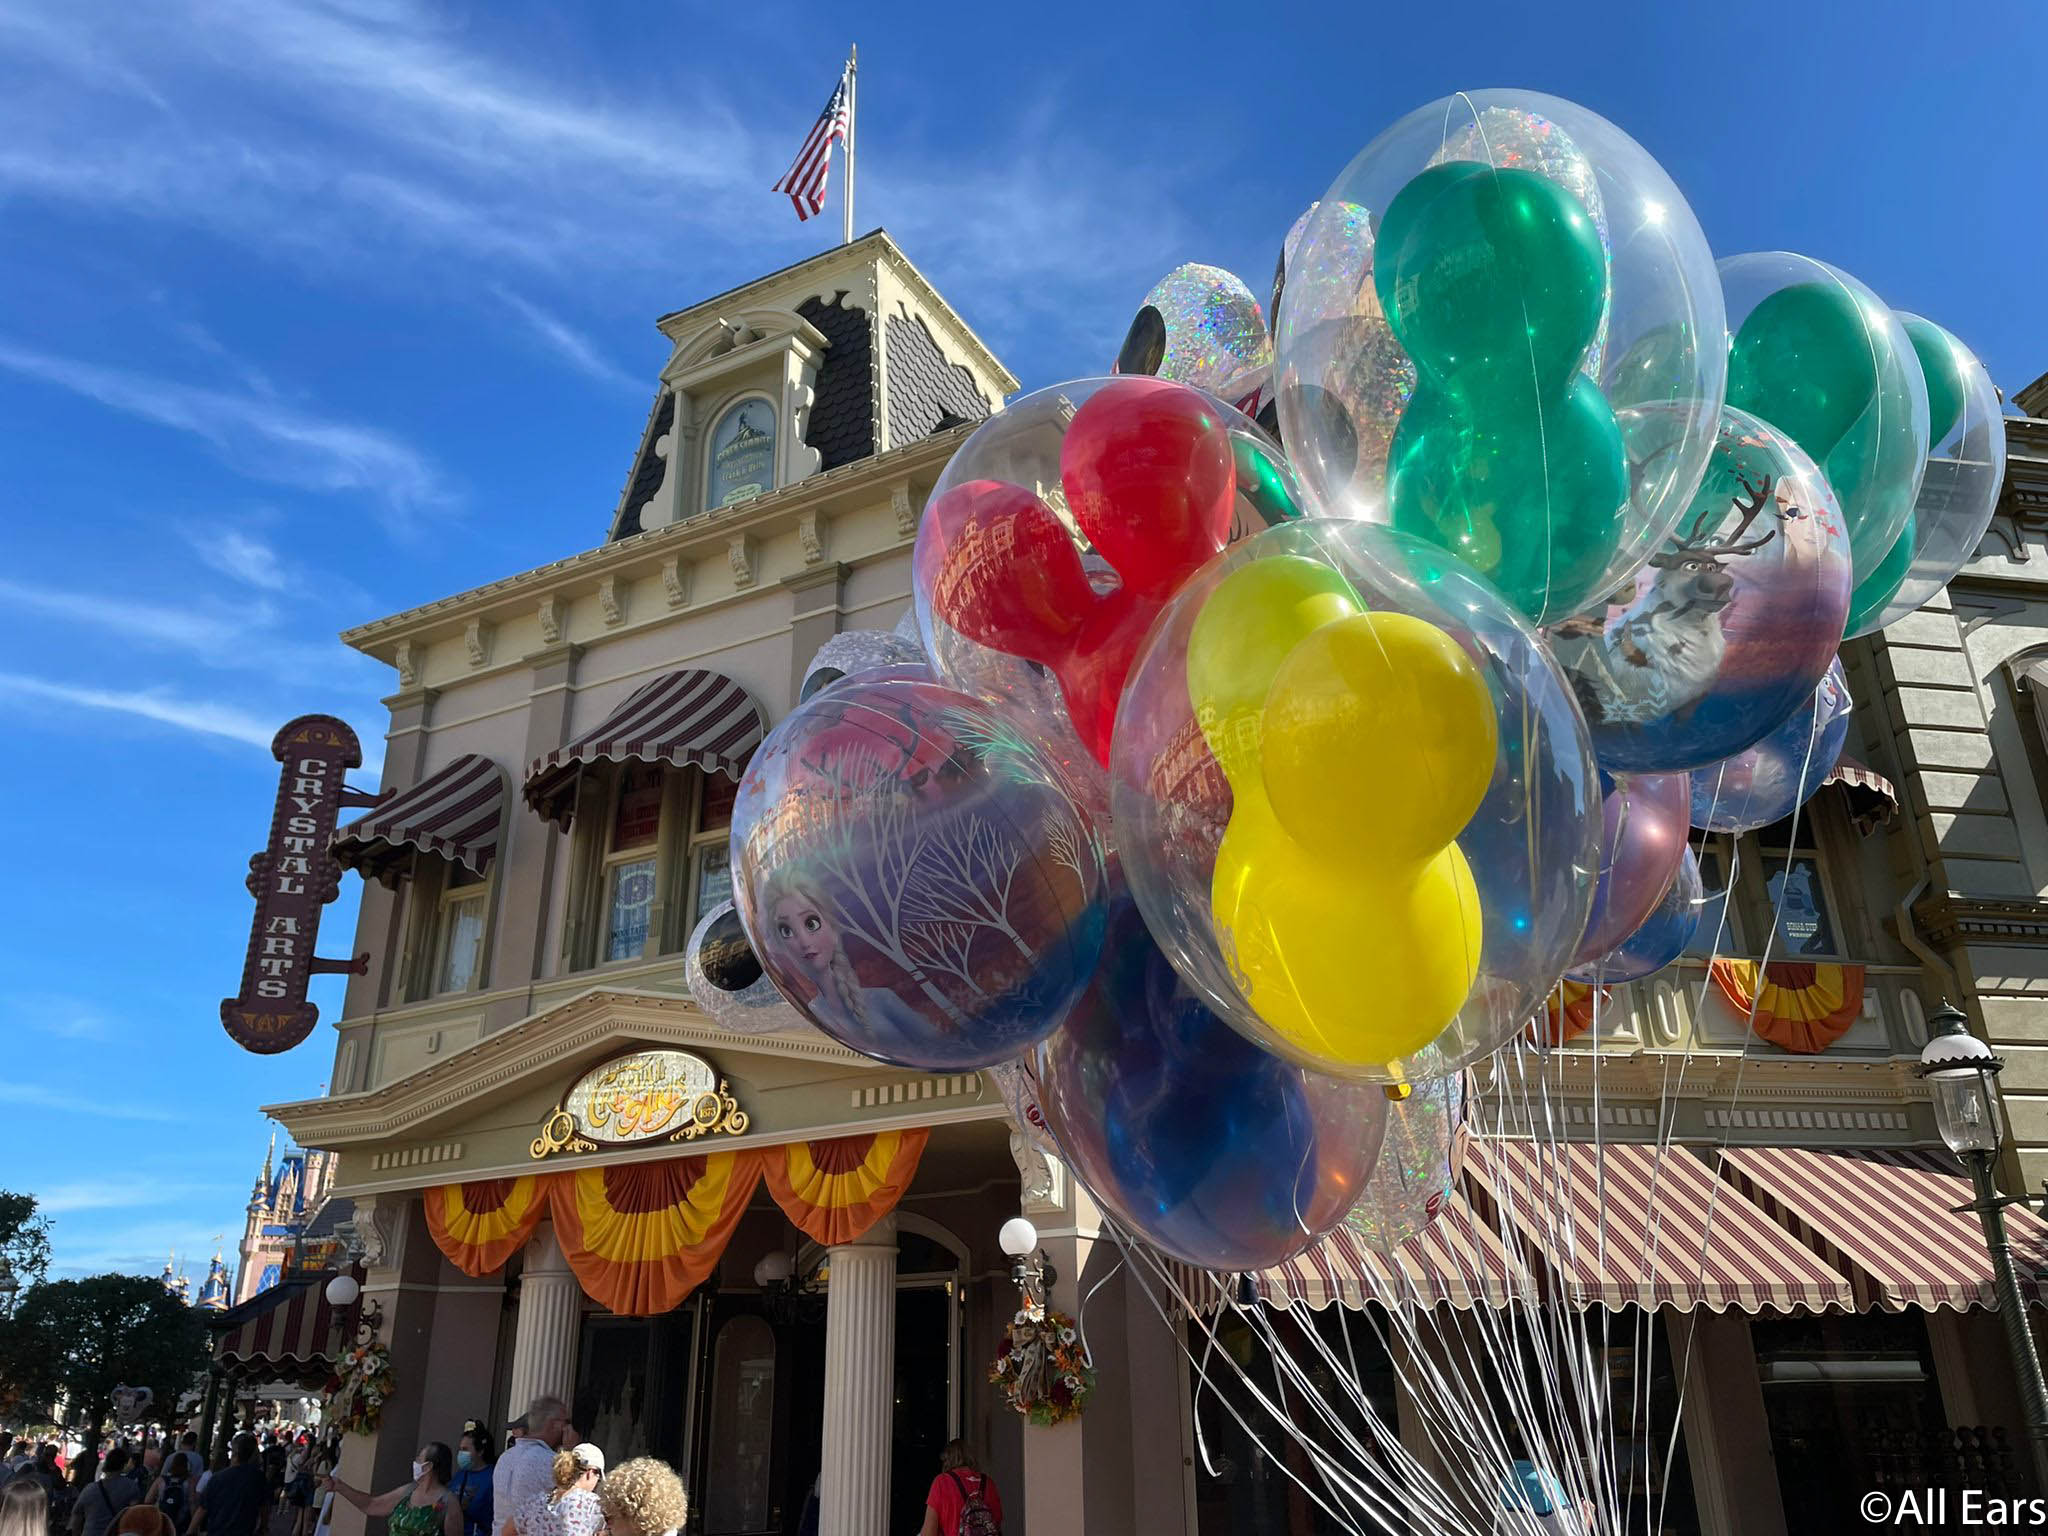 Disney Park Attraction Closes Abruptly With No Reopening in Sight